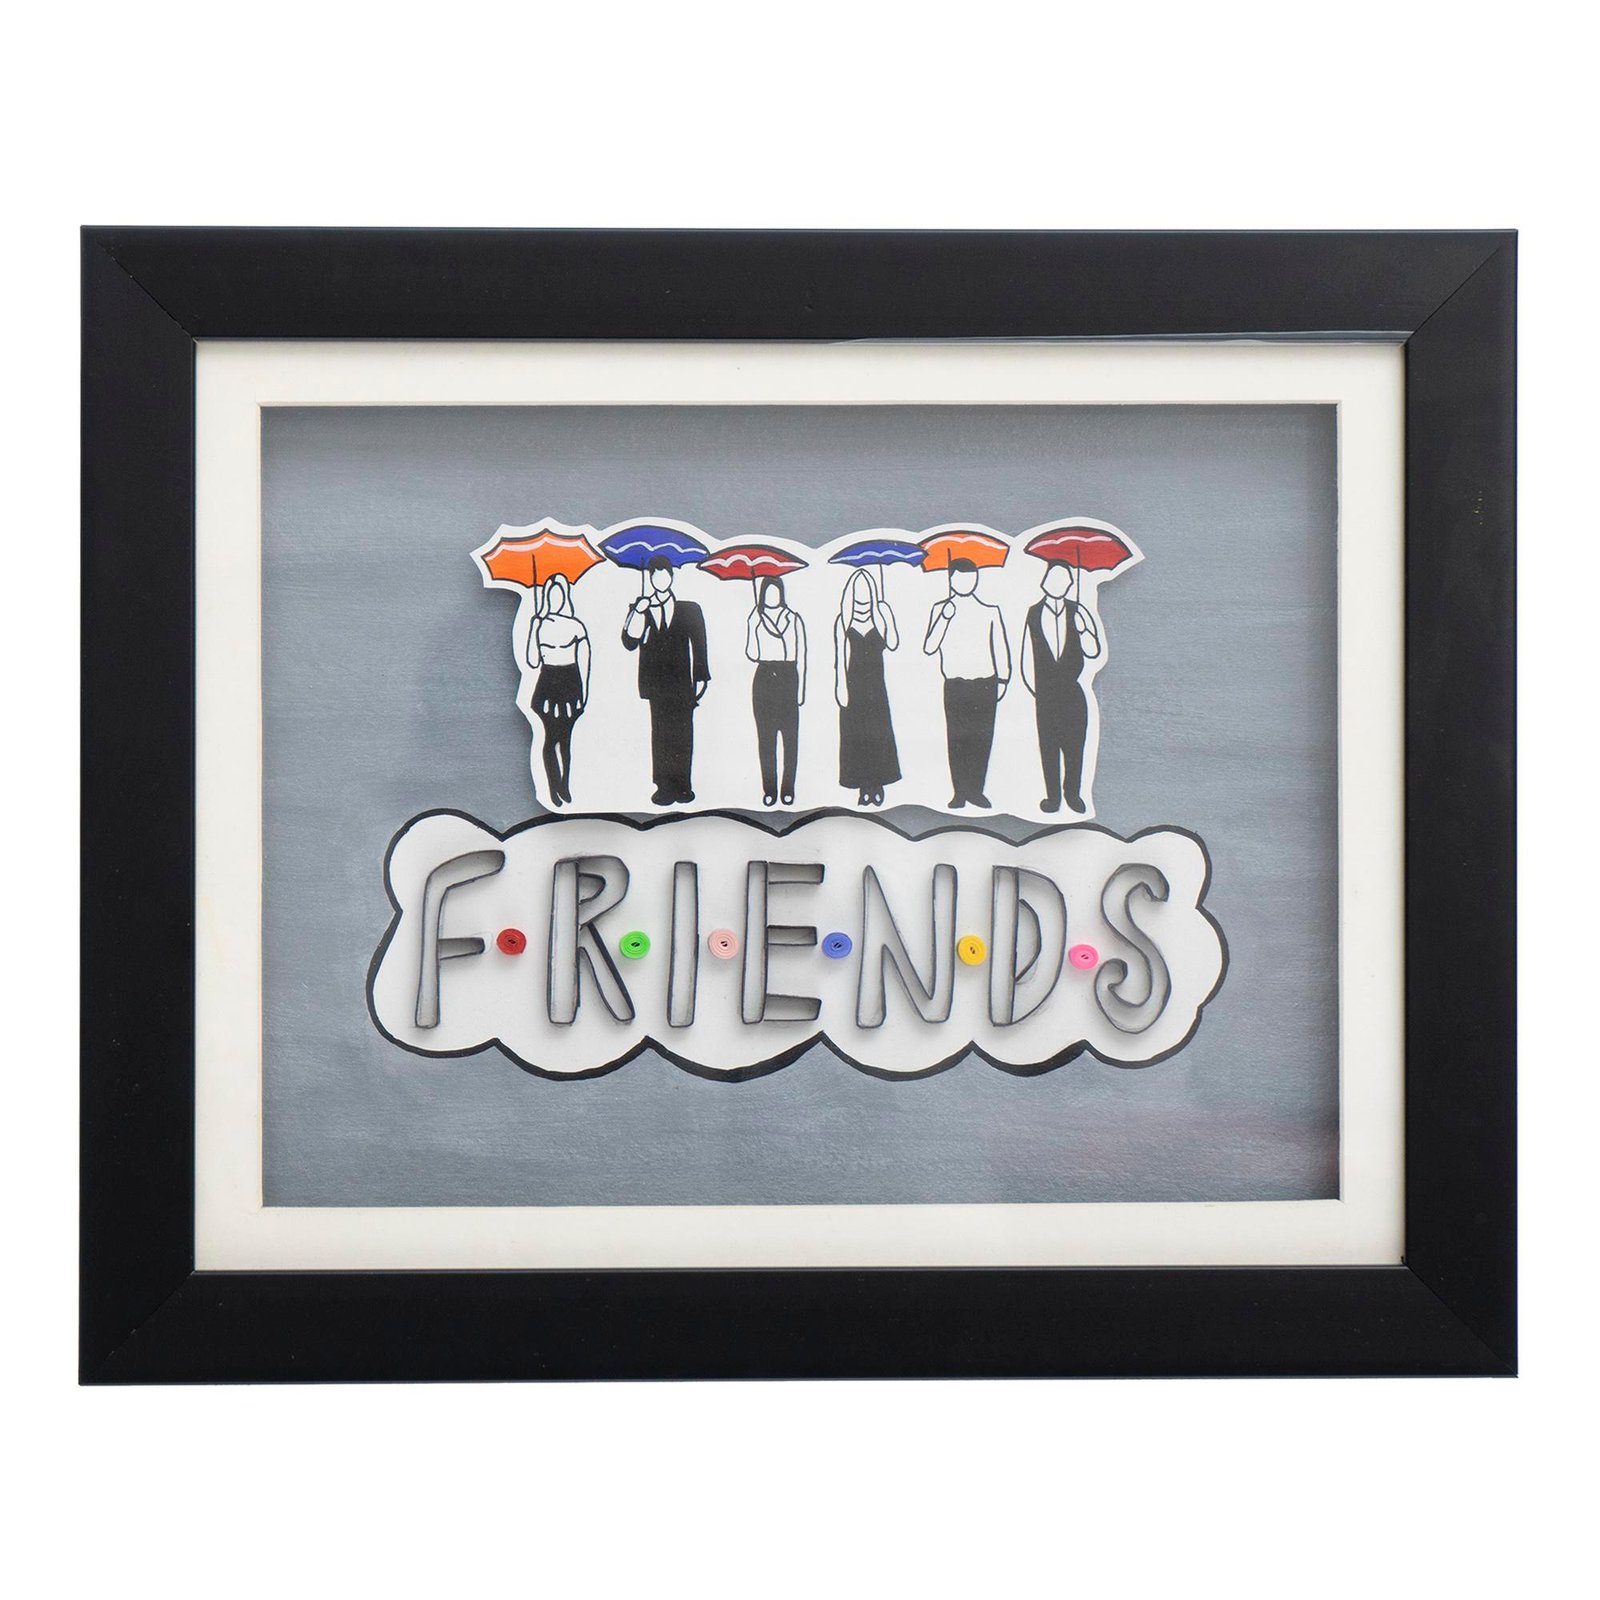 Buy Friends Wall Art -One with umbrellas - SMEWIndia